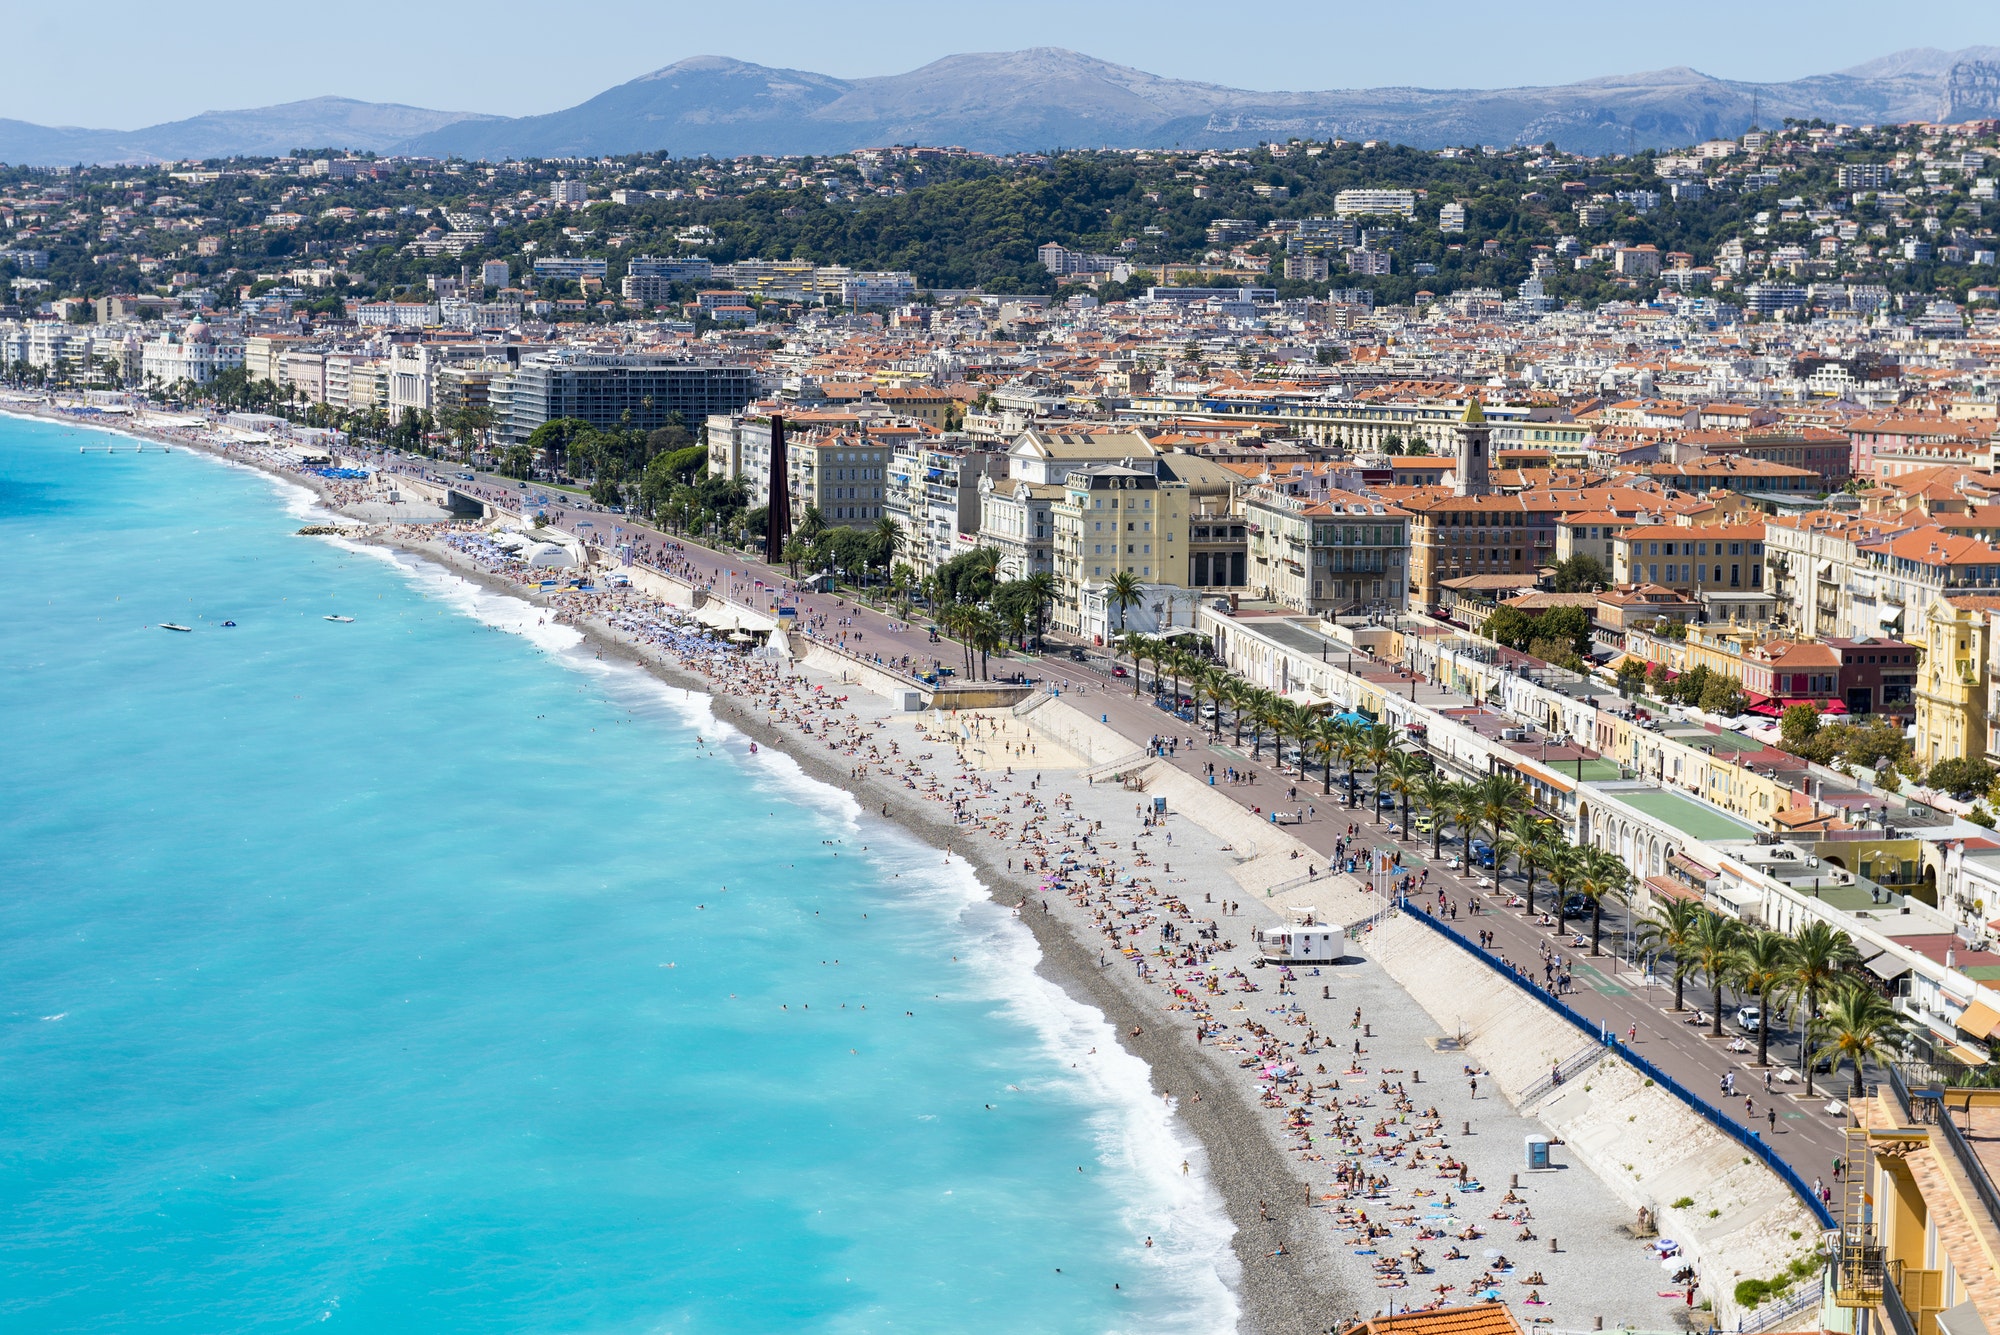 Cityscape view with coastline and beach, Nice, Cote d'Azur, France